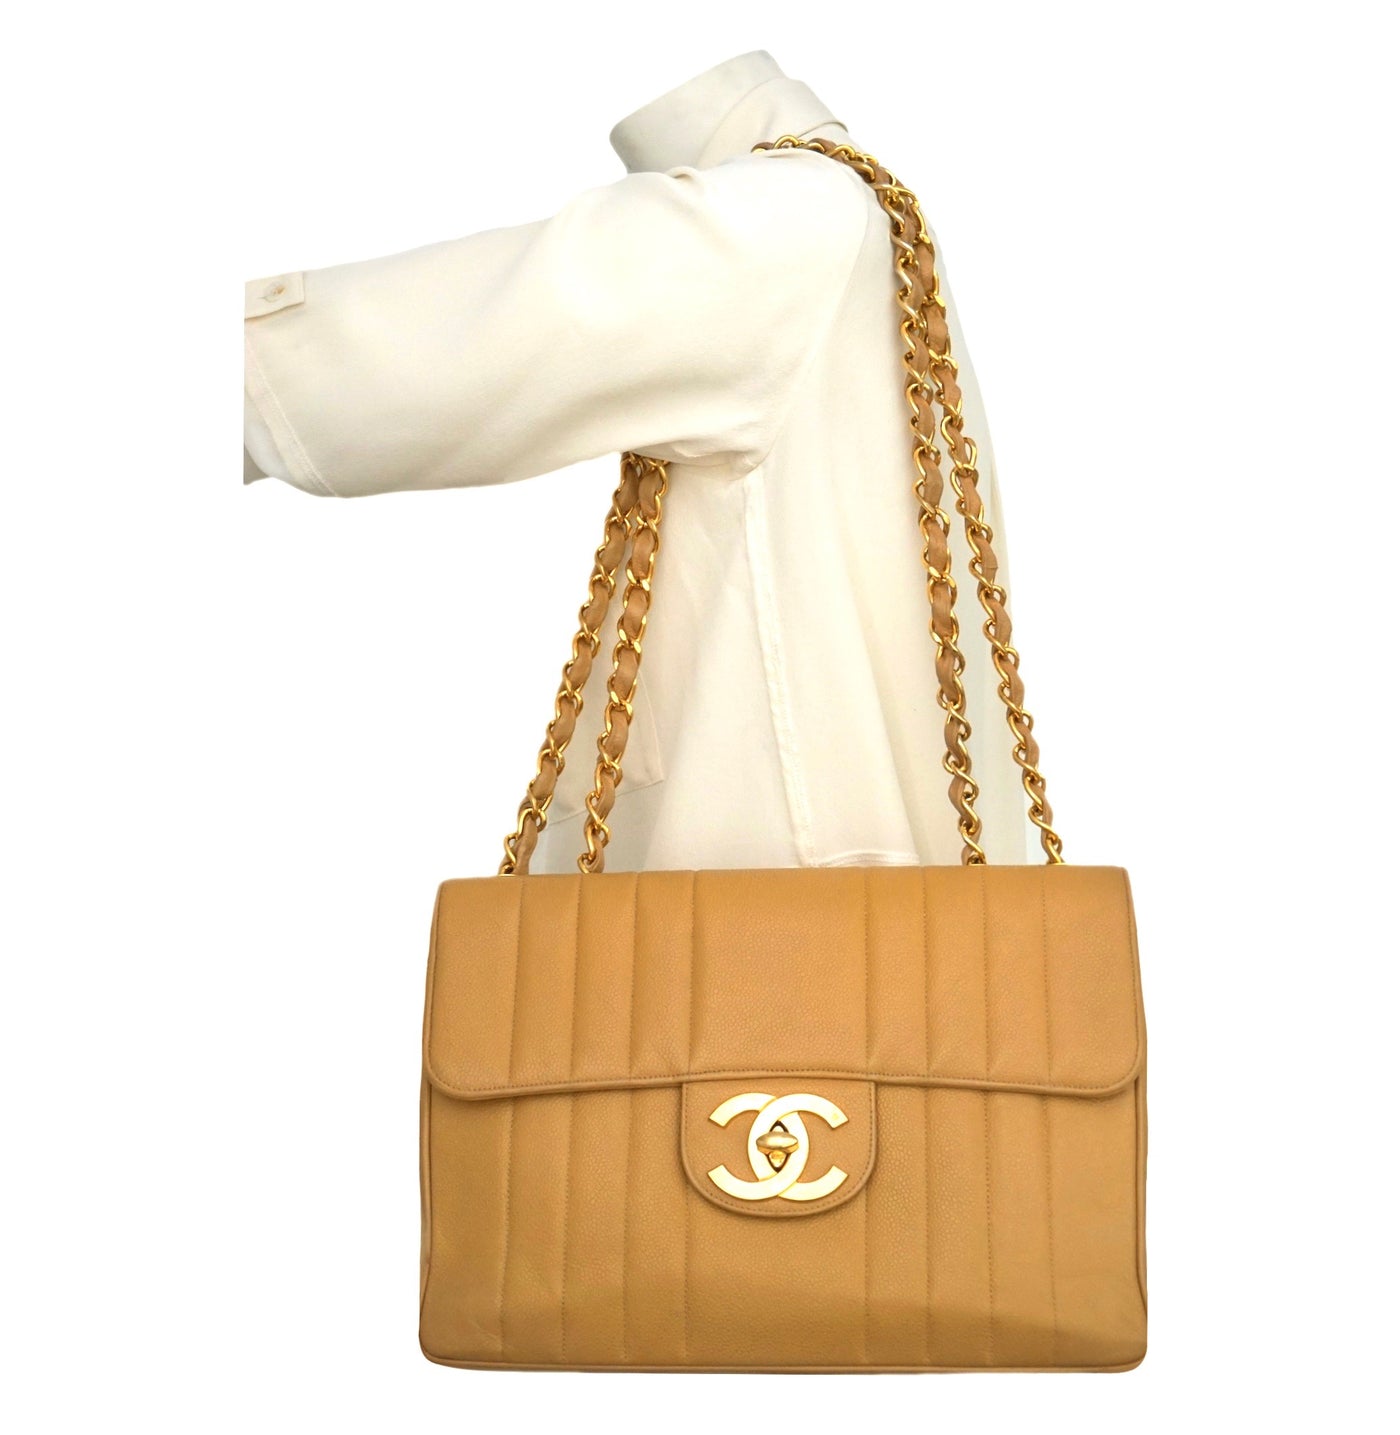 Authentic Chanel Vintage Tan Caviar Vertical Quilted Jumbo